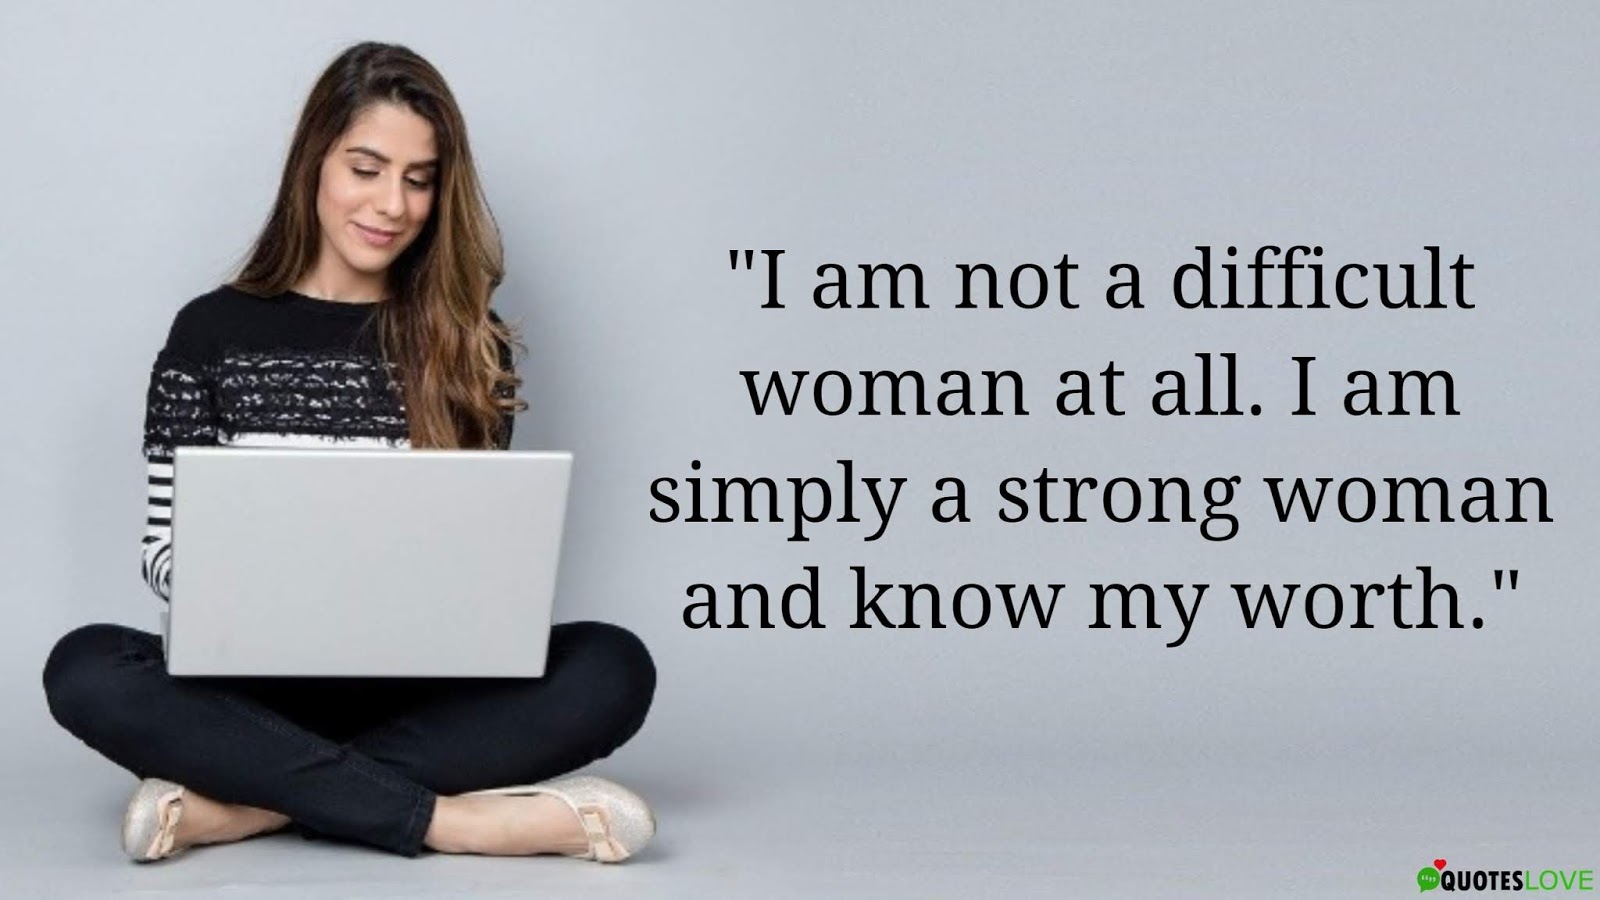 25+ (Best) Working Women Quotes To Make Them Stronger